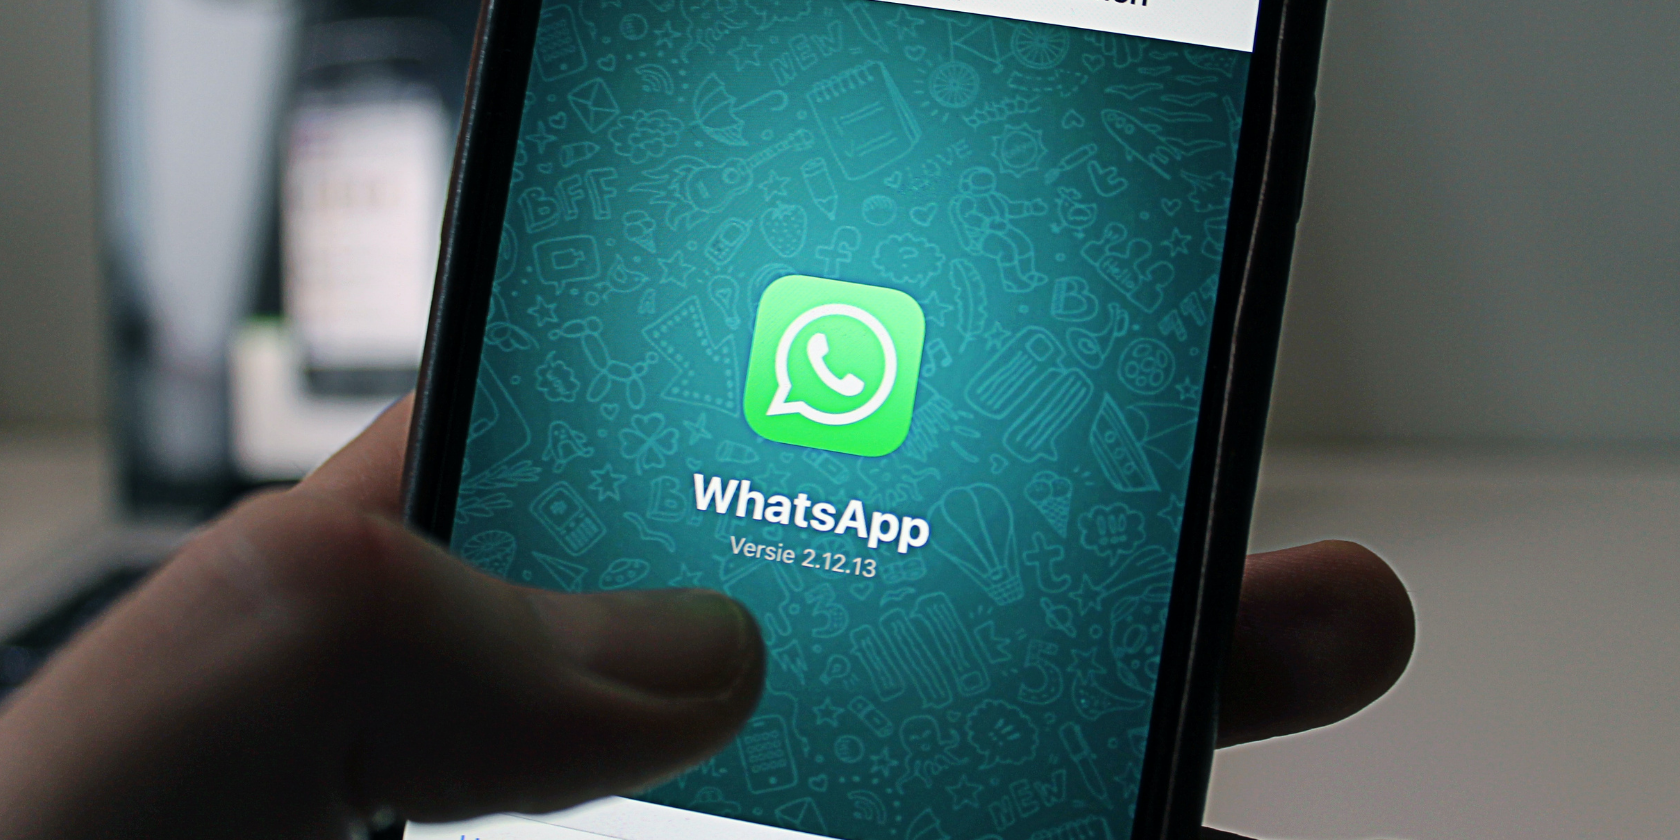 whatsapp terms of service